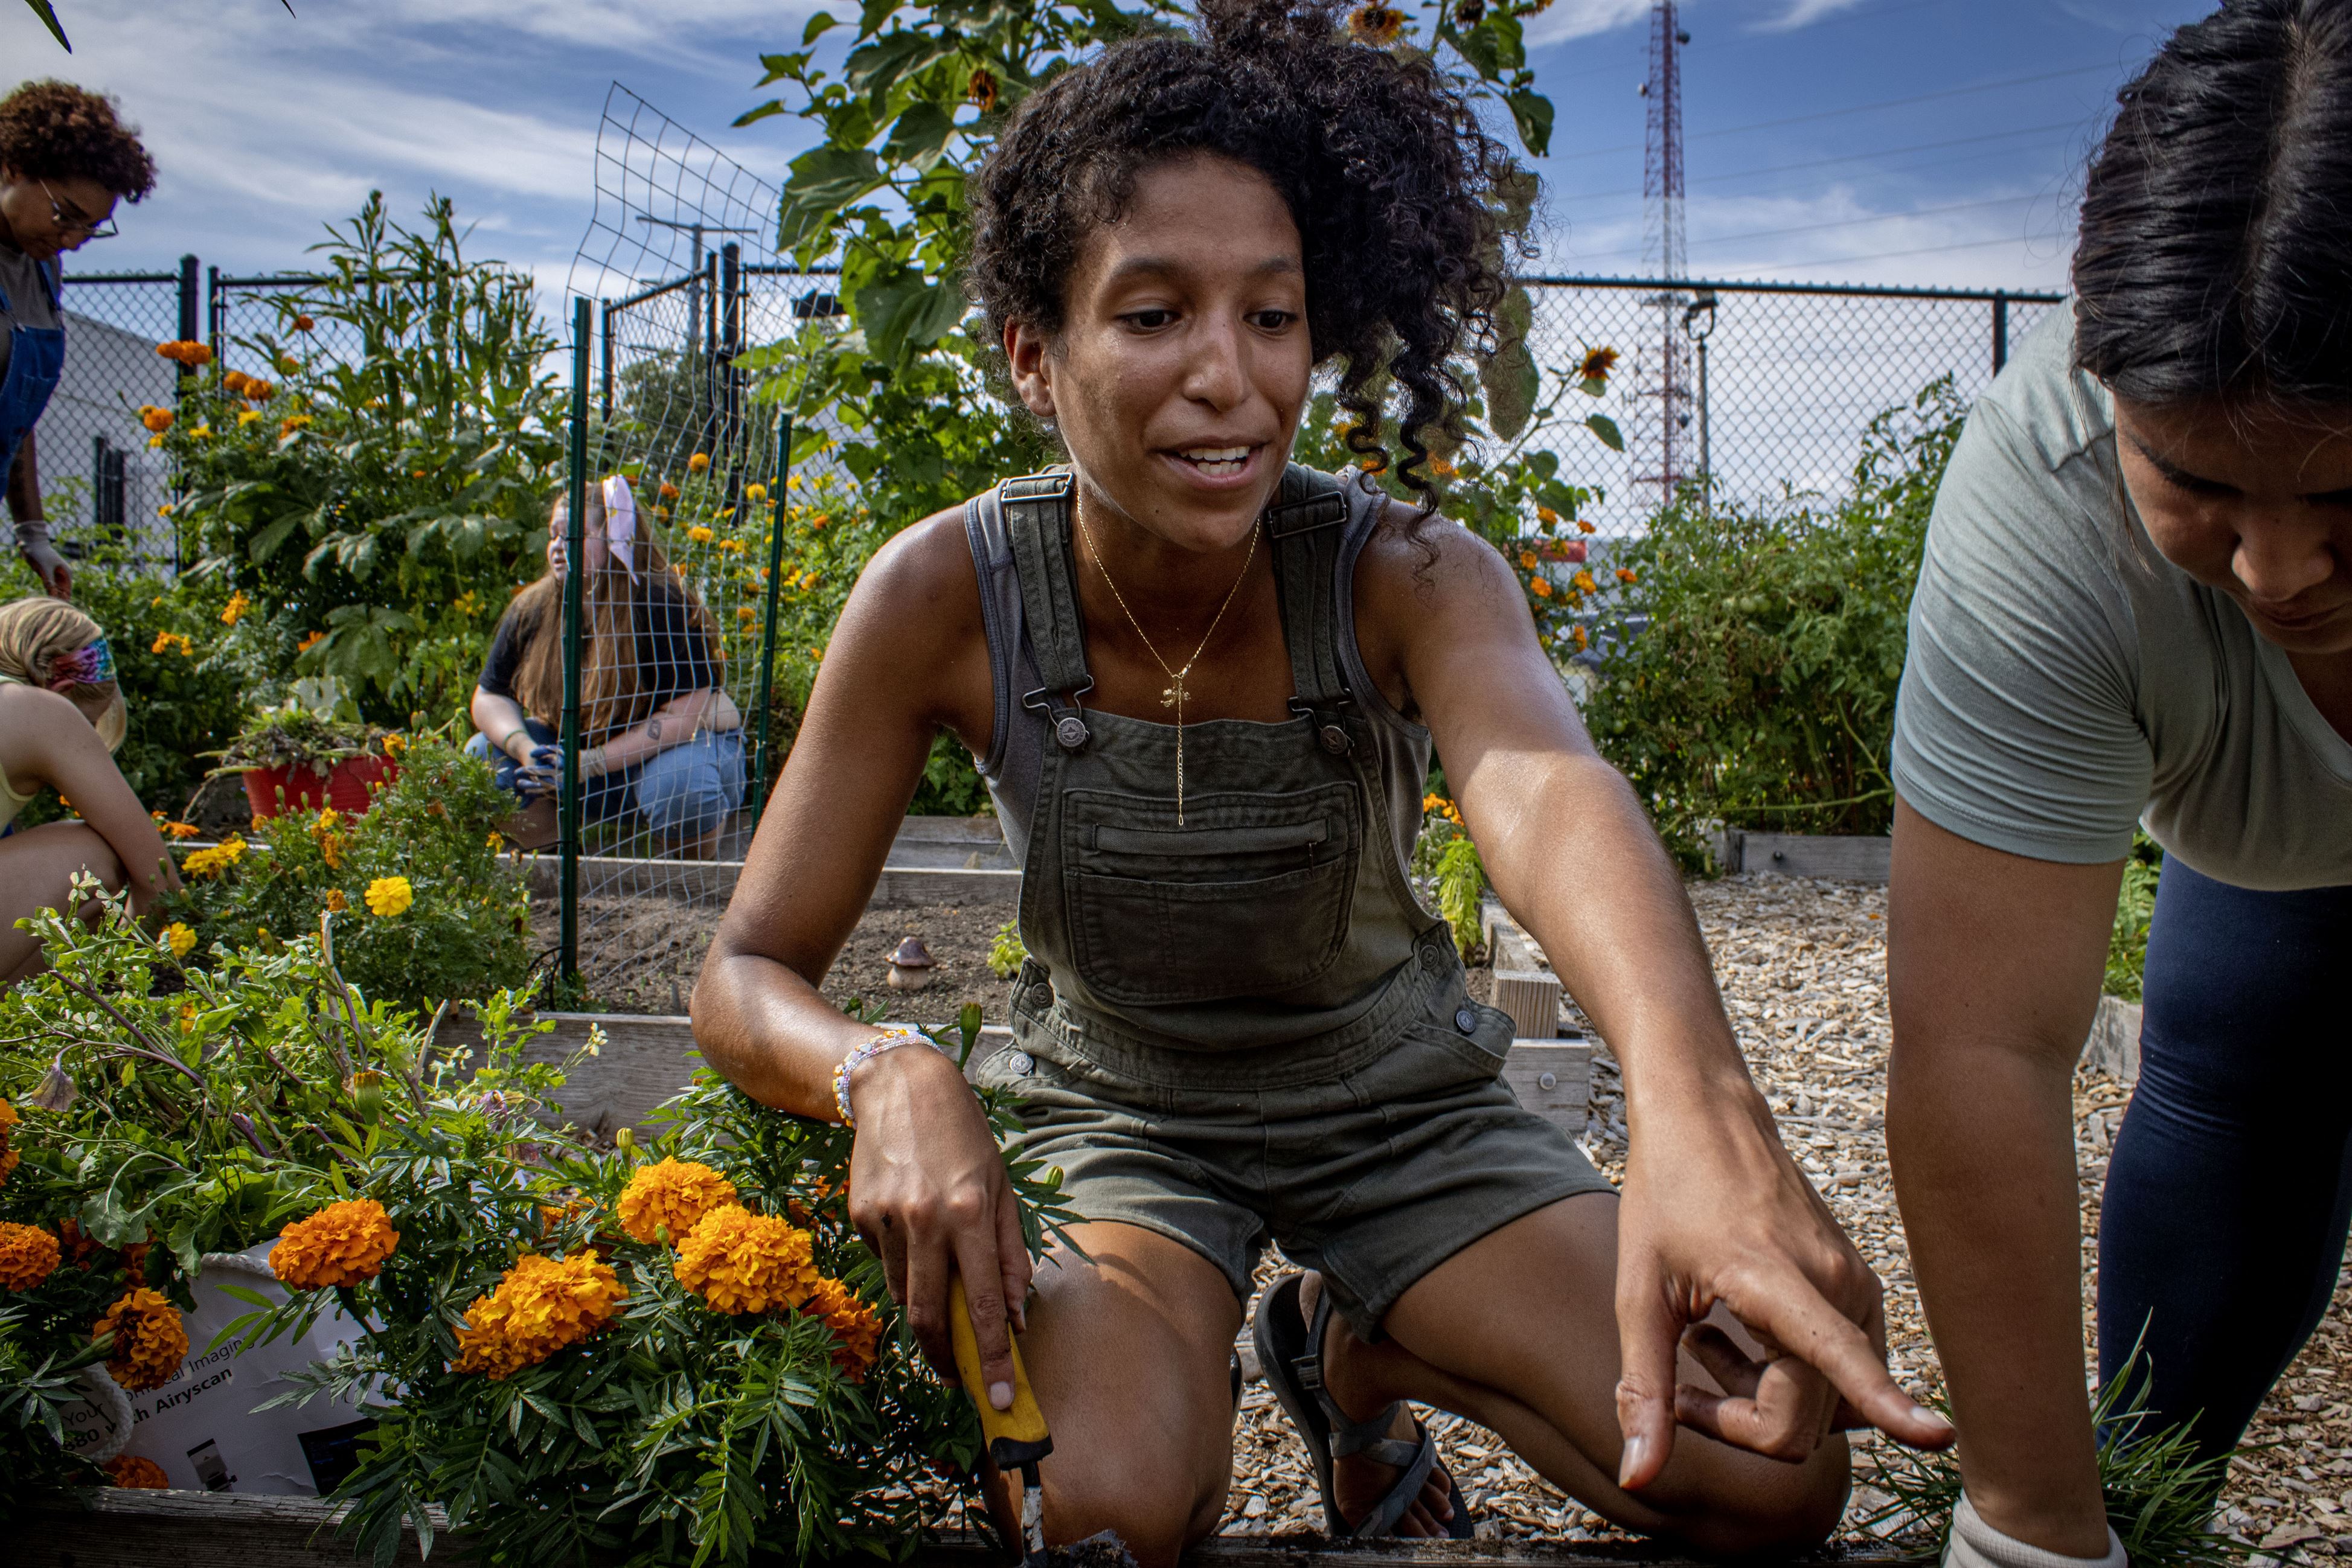 Staff member Brittney Portes, the director of the community garden, guiding students on how to properly harvest all the summer plants so they could re-plant for fall as part of their Fall Planting 101 event.
Dani Mazariegos | The Montclarion